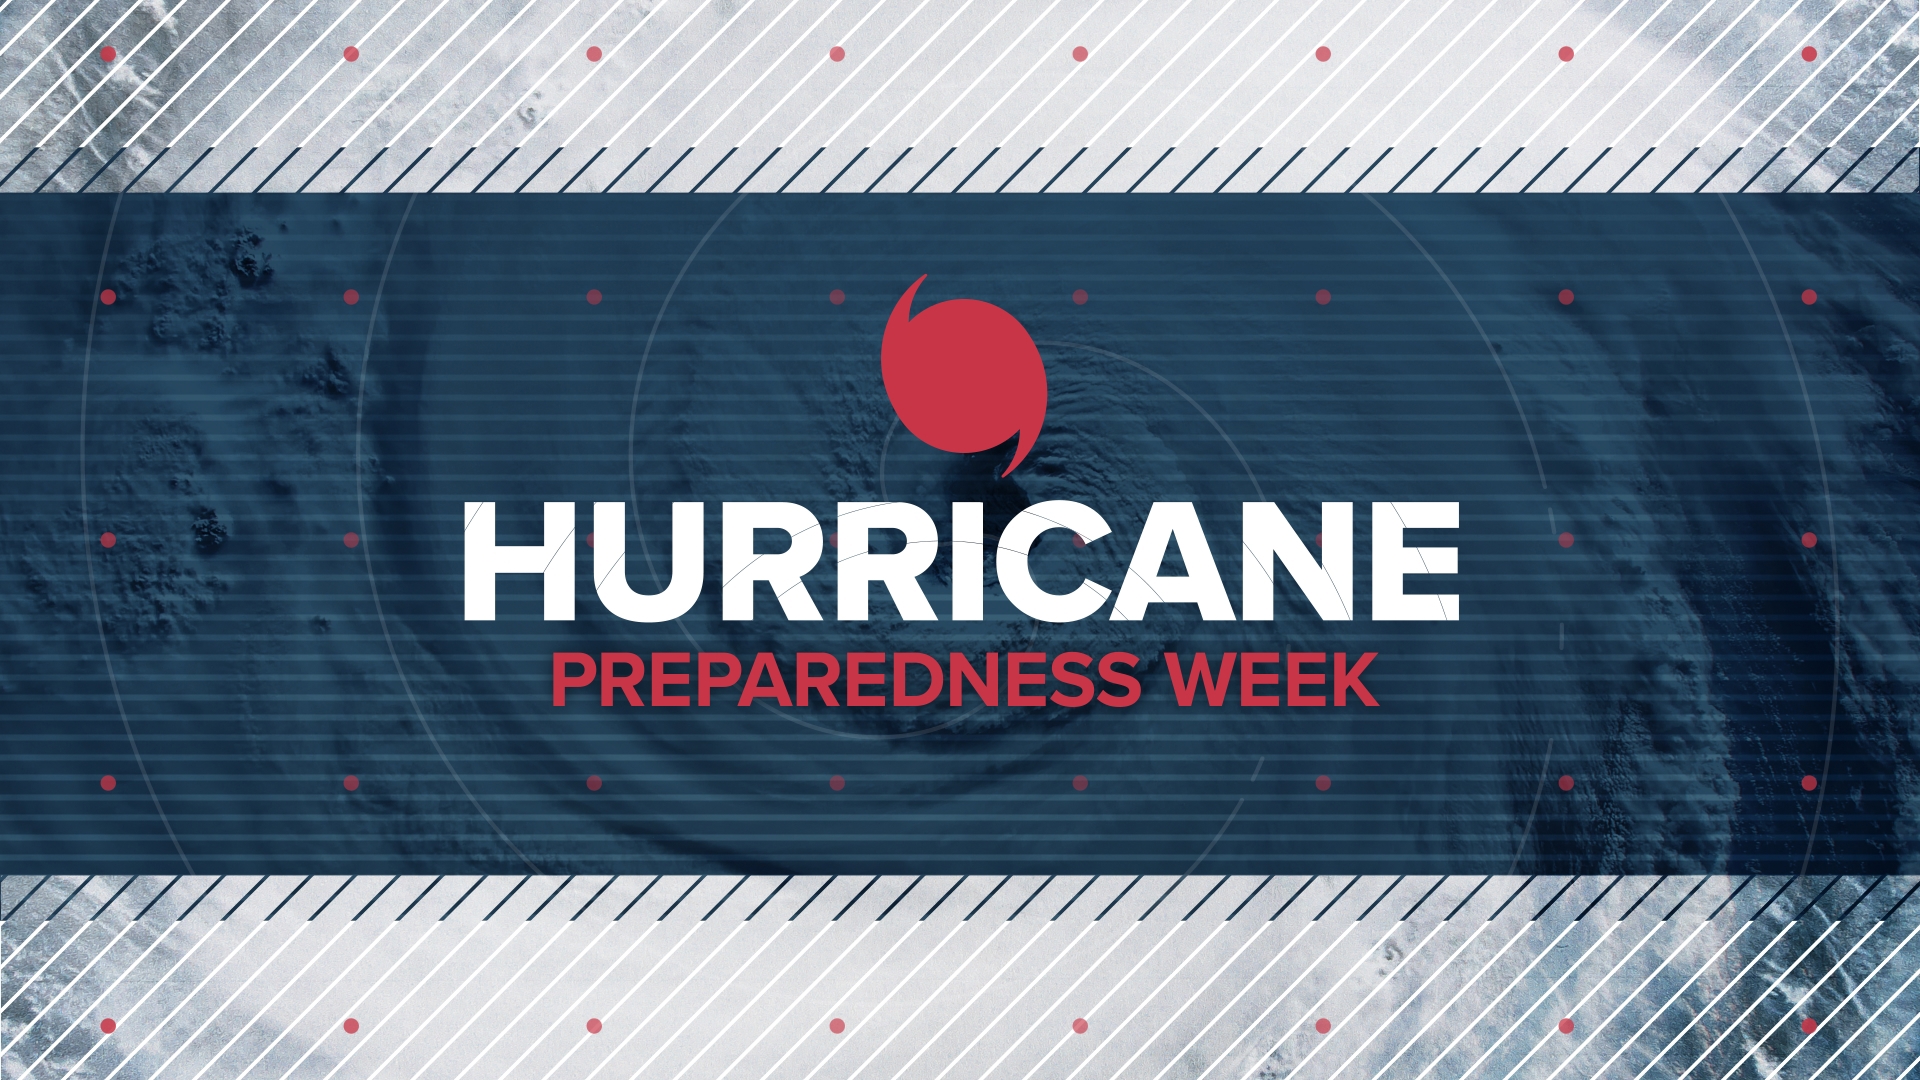 Hurricane Awareness Week spans from May 5-11, the focus is for equipping communities with vital knowledge about the dangers associated with hurricanes and the critic